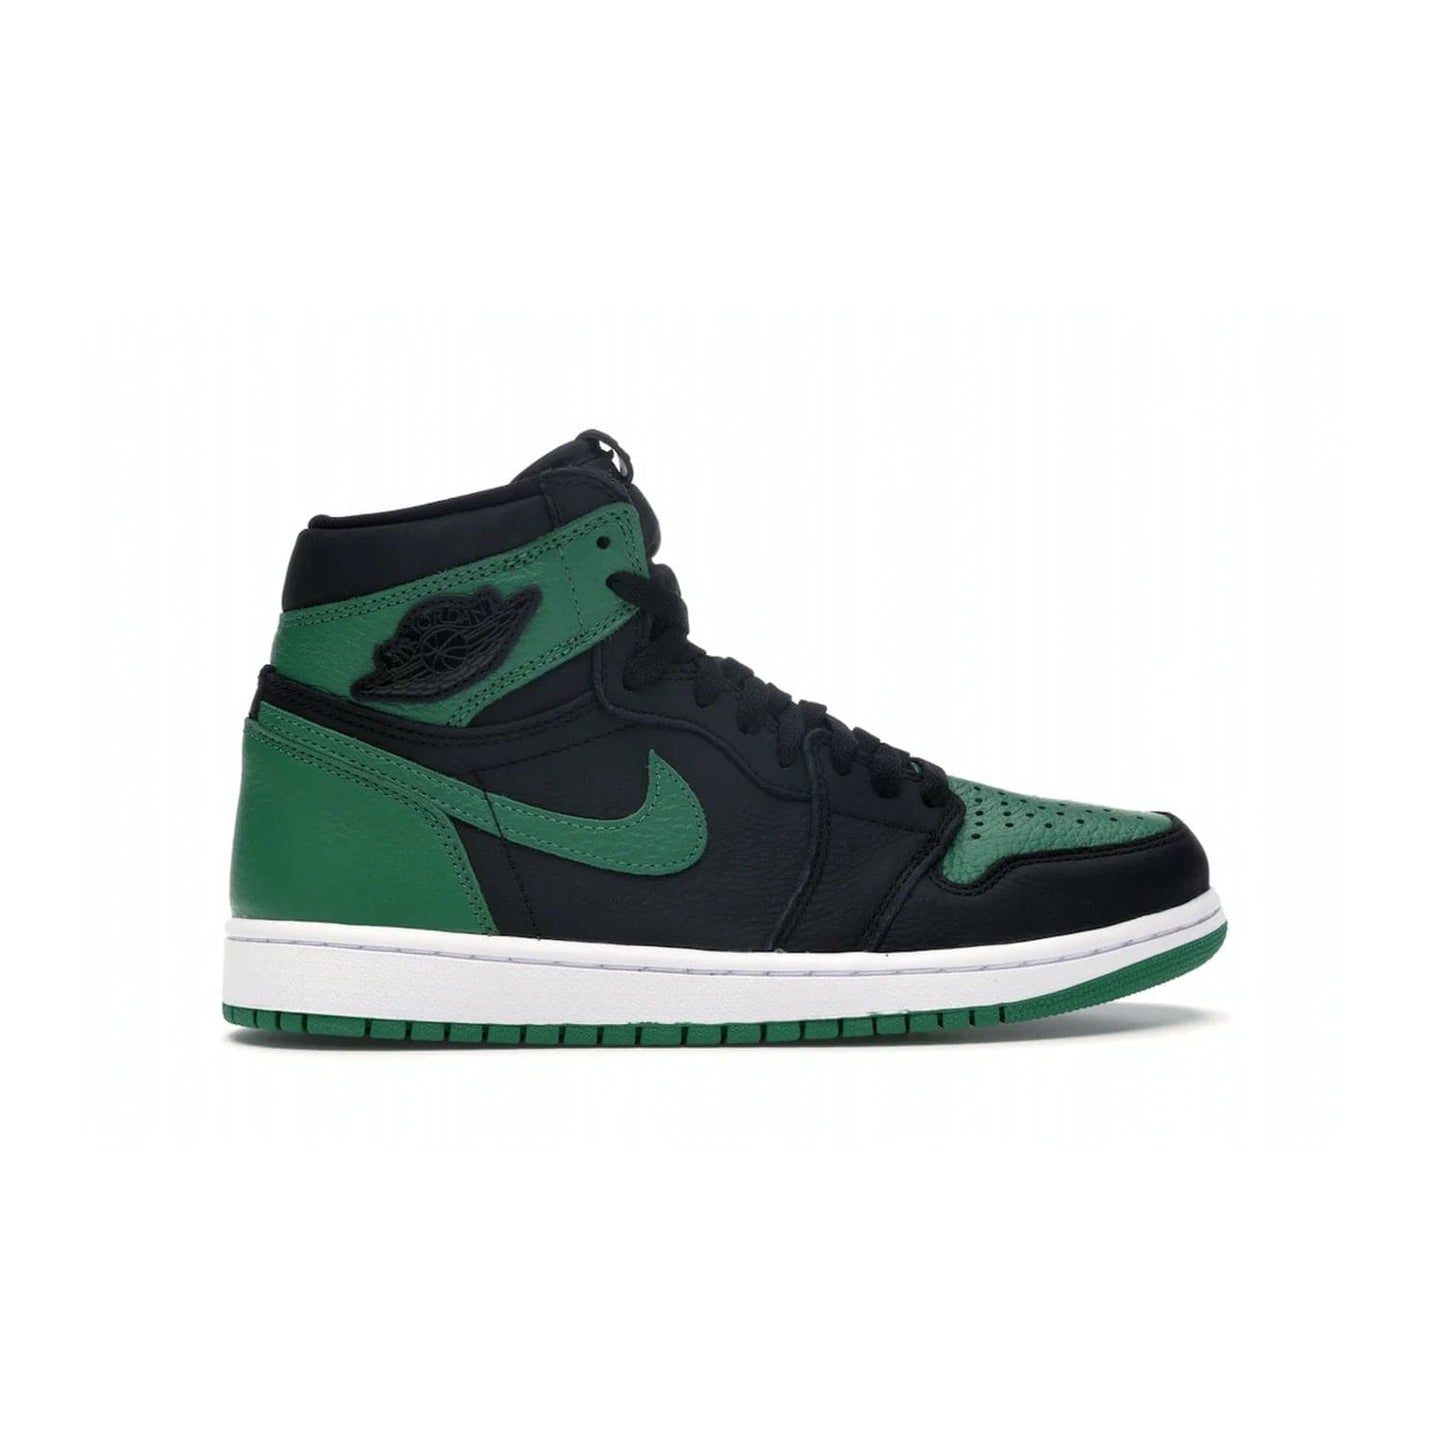 Jordan 1 Retro High Pine Green Black - Image 36 - Only at www.BallersClubKickz.com - Step into fresh style with the Jordan 1 Retro High Pine Green Black. Combining a black tumbled leather upper with green leather overlays, this sneaker features a Gym Red embroidered tongue tag, sail midsole, and pine green outsole for iconic style with a unique twist.